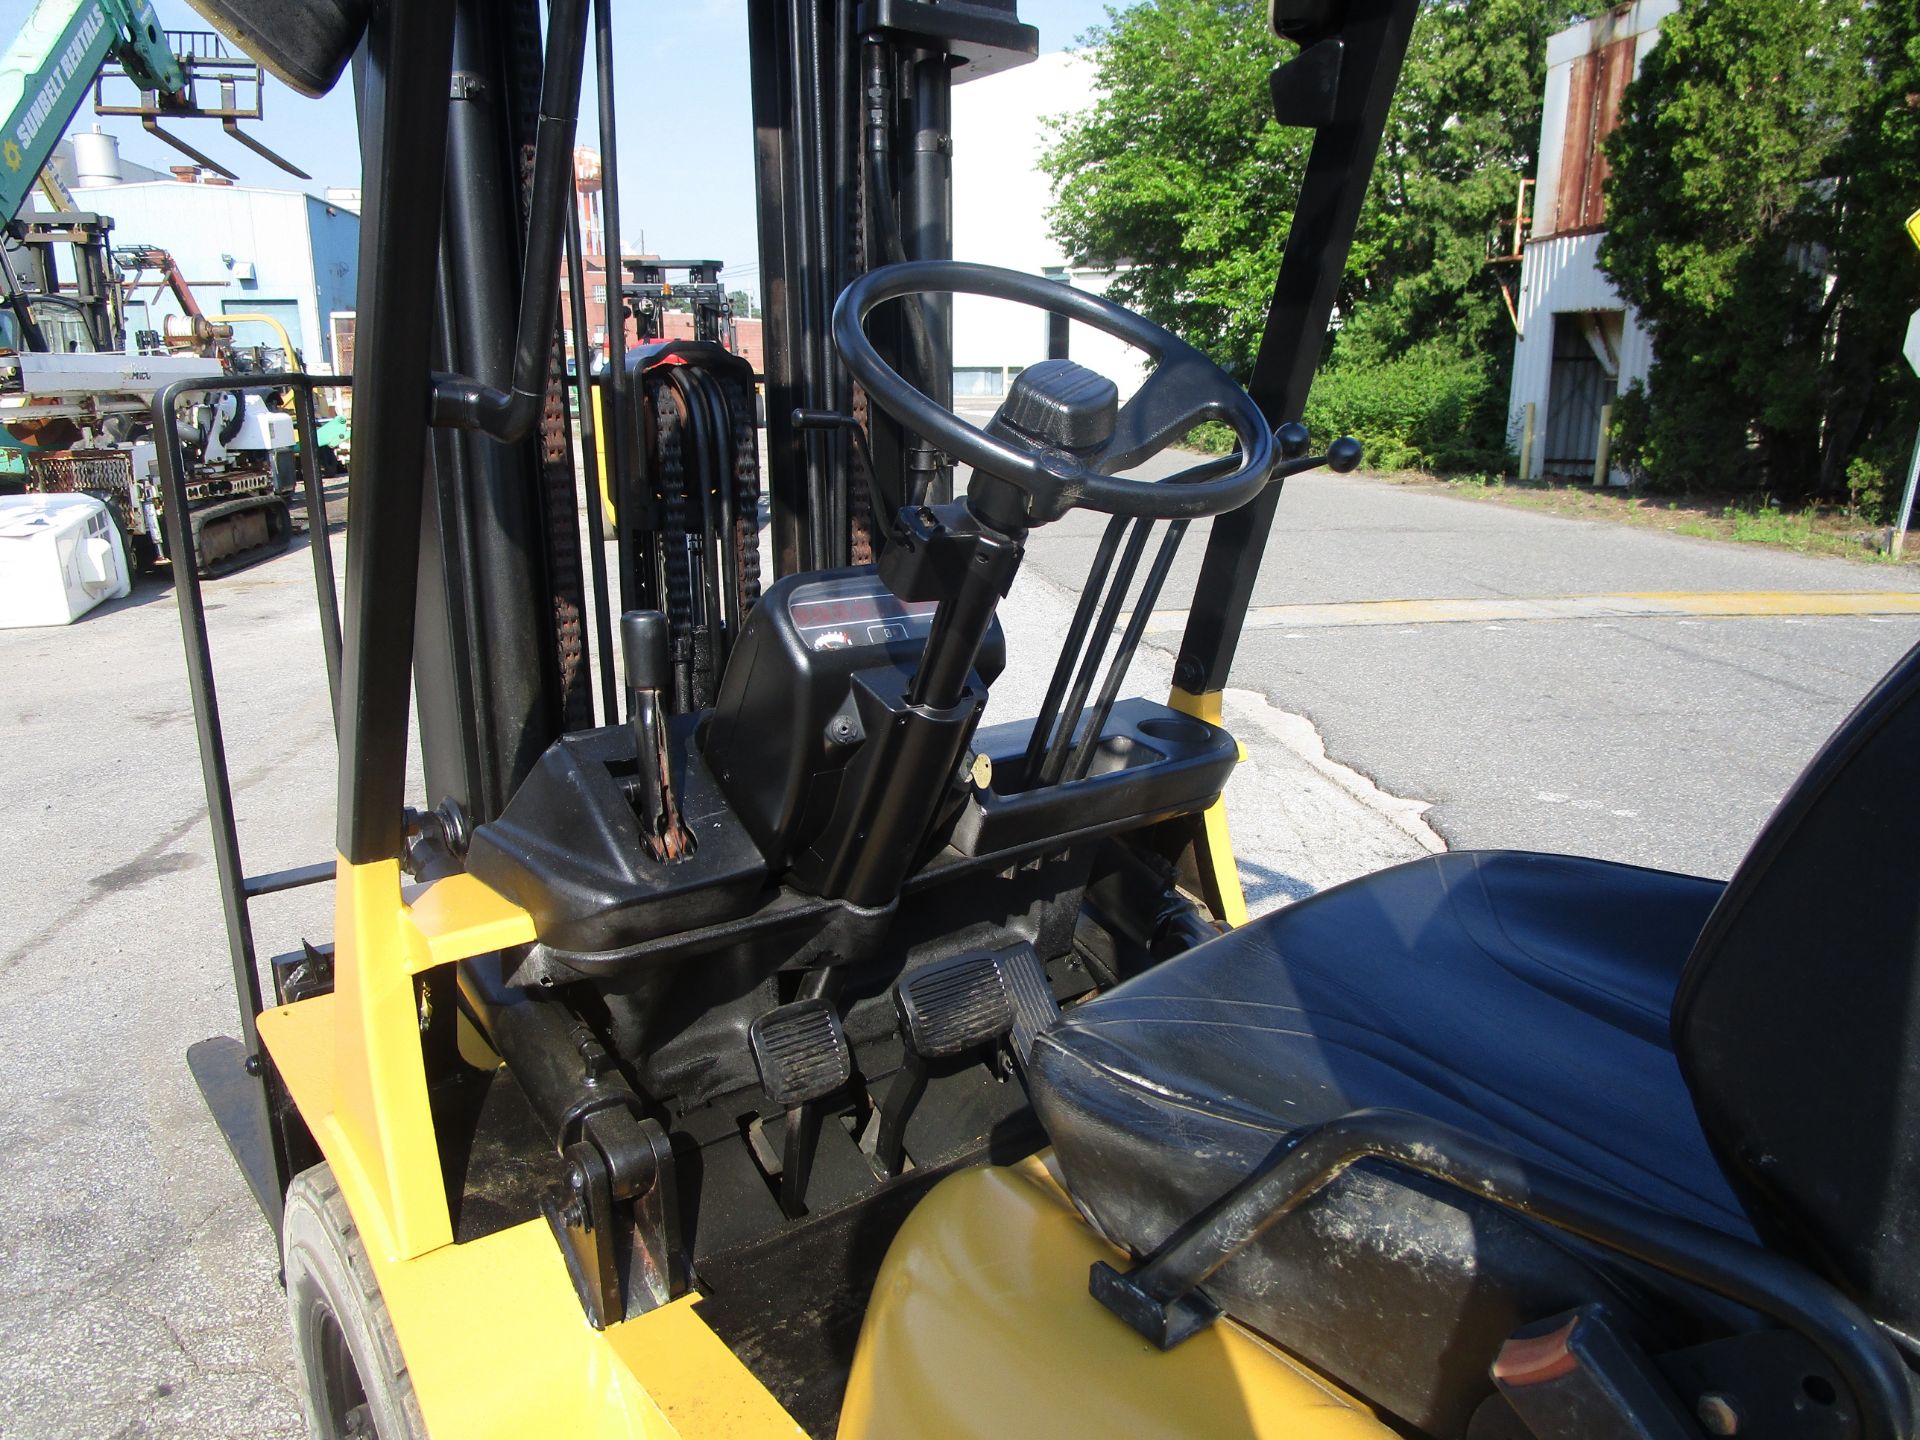 Caterpillar GP20 4,000lb Forklift - Located in Lester, PA - Image 3 of 9